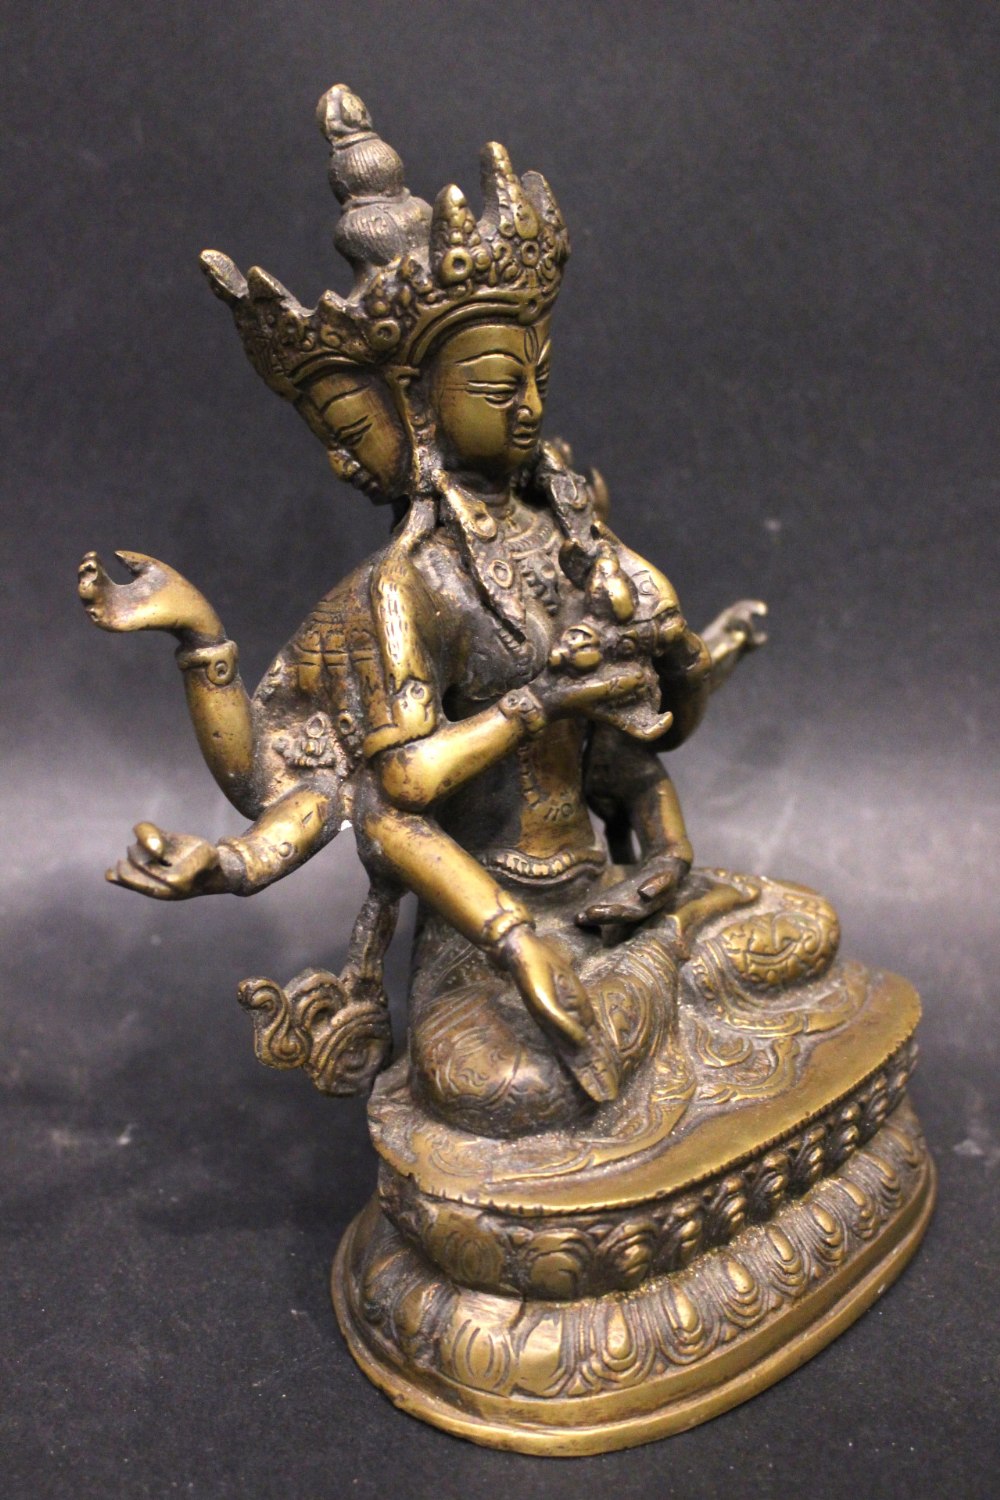 A BRASS FIGURE OF THE BUDDHIST DIETY USHNISHAVIJAYA, with three heads and 8 arms, sitting in the - Image 2 of 3